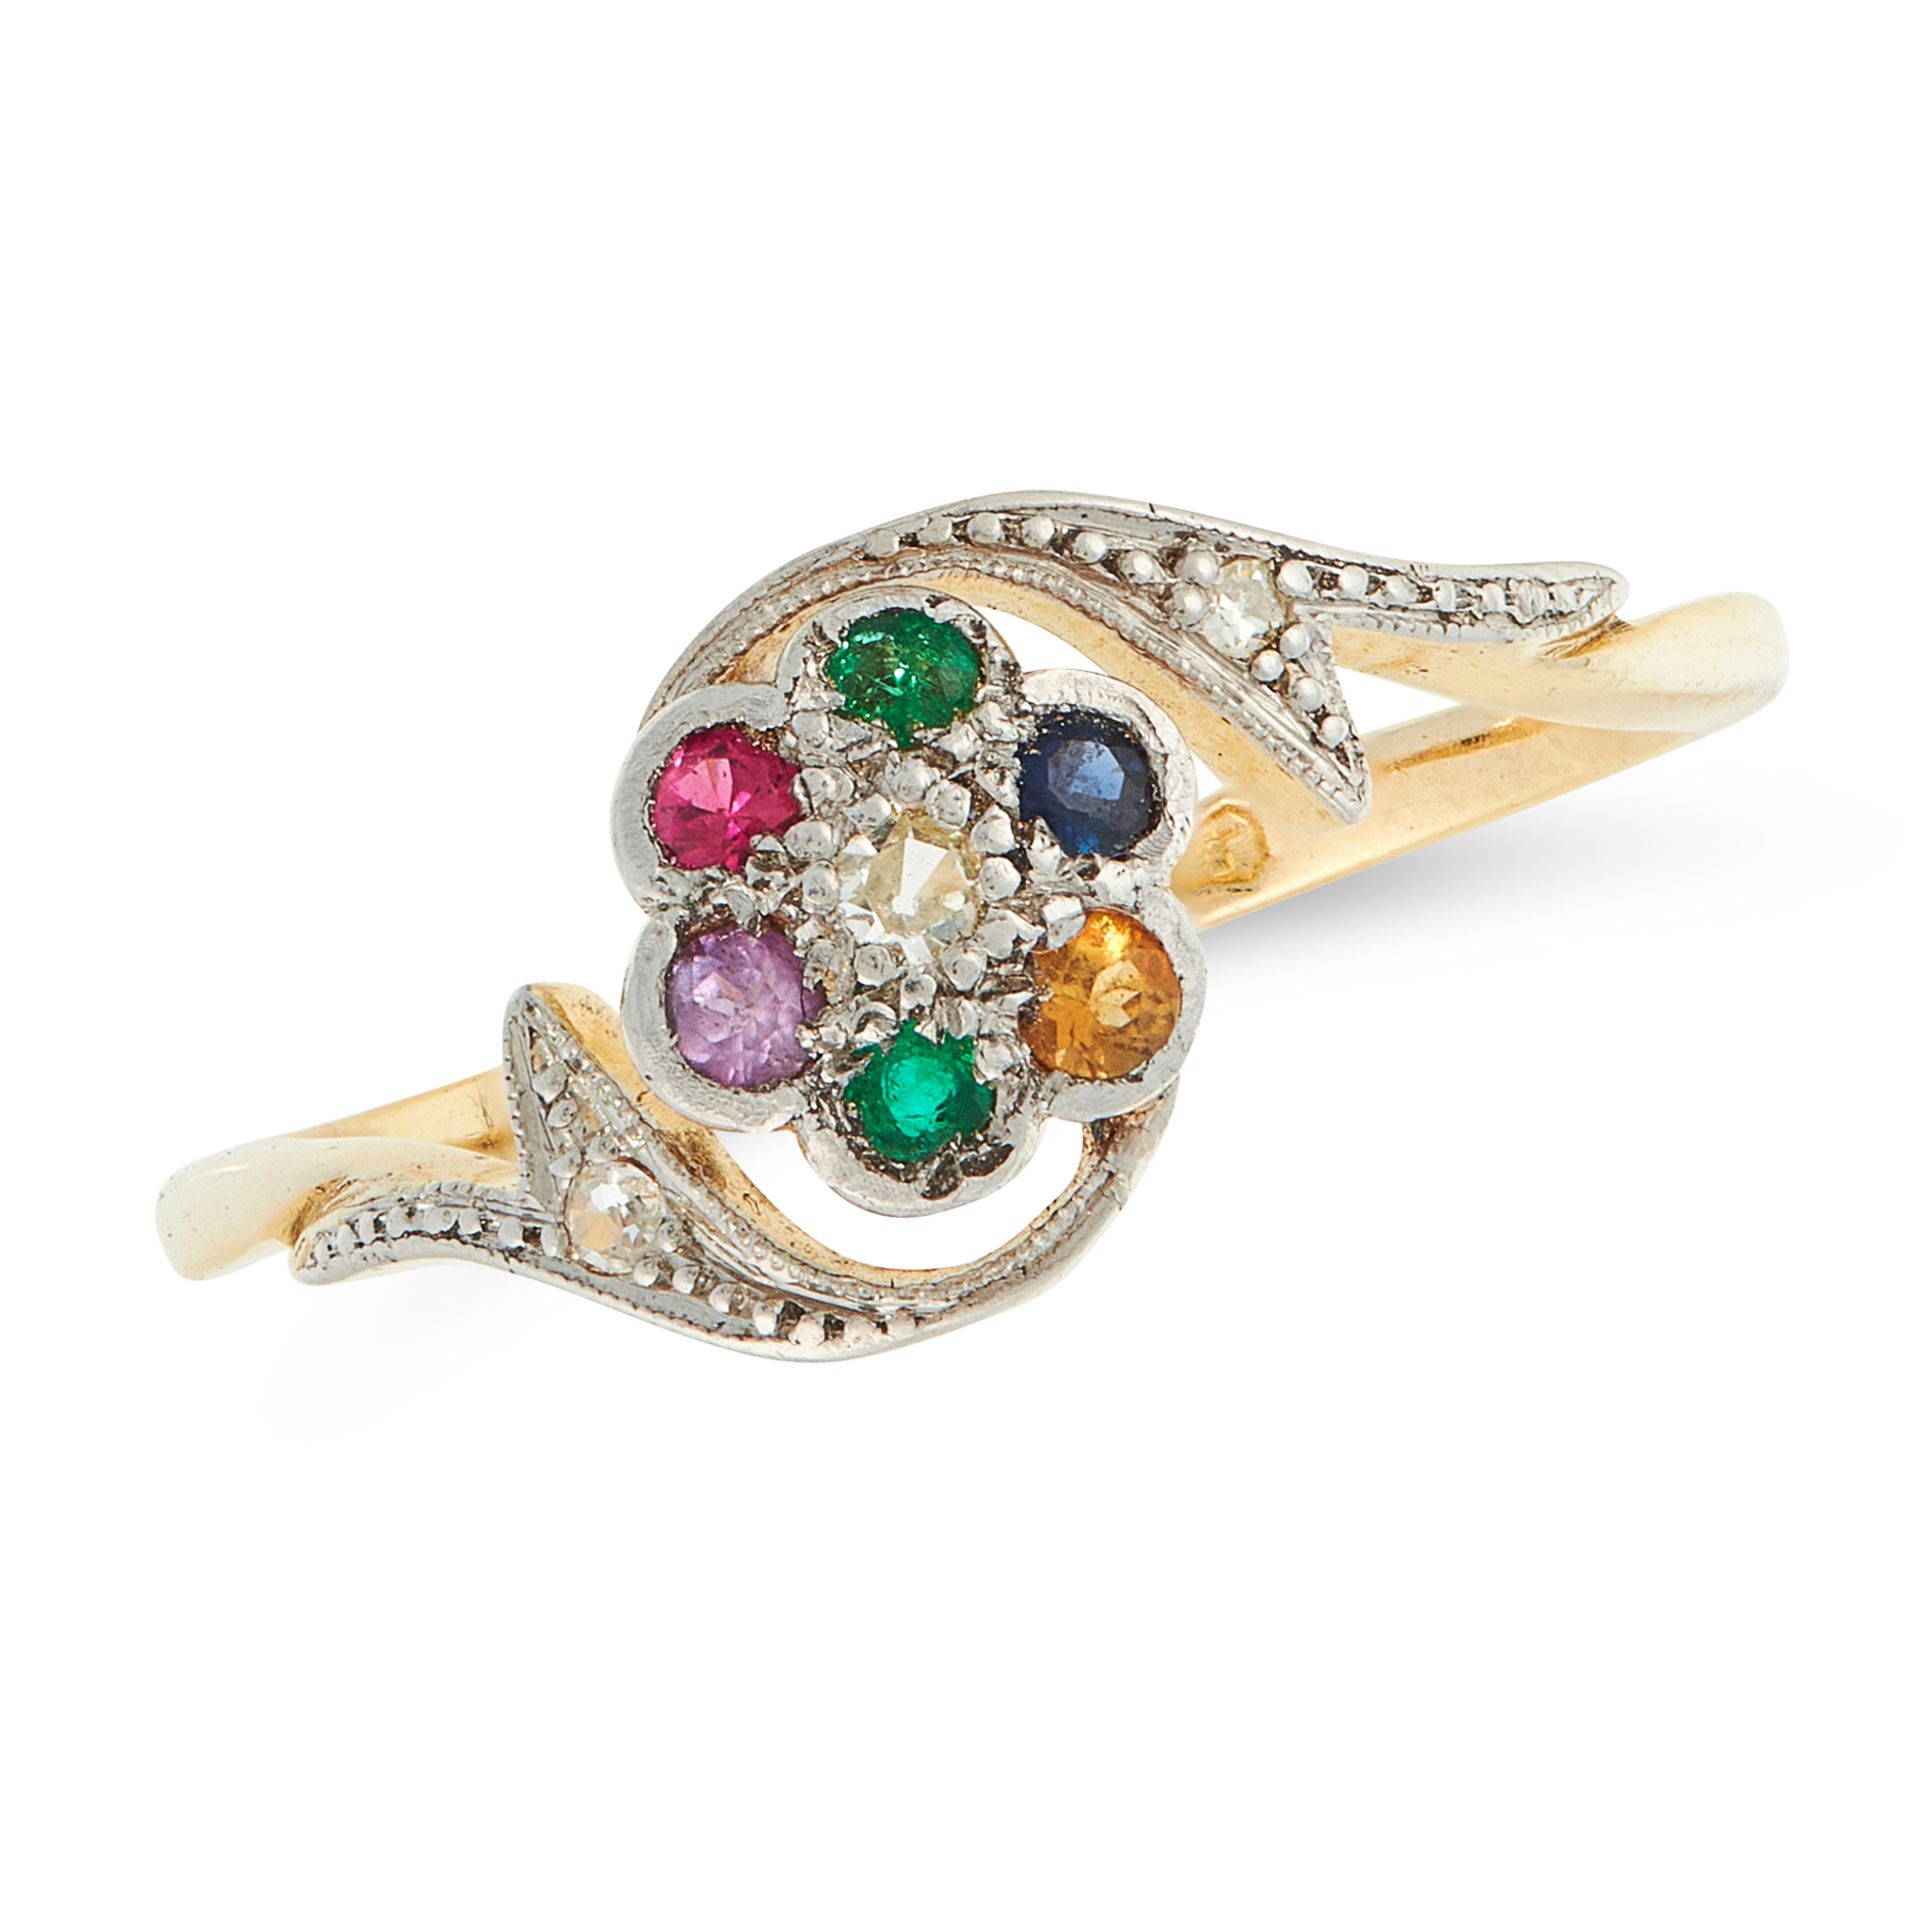 A GEMSET DEAREST RING, EARLY 20TH CENTURY in 18ct yellow gold and platinum, set with a round cut